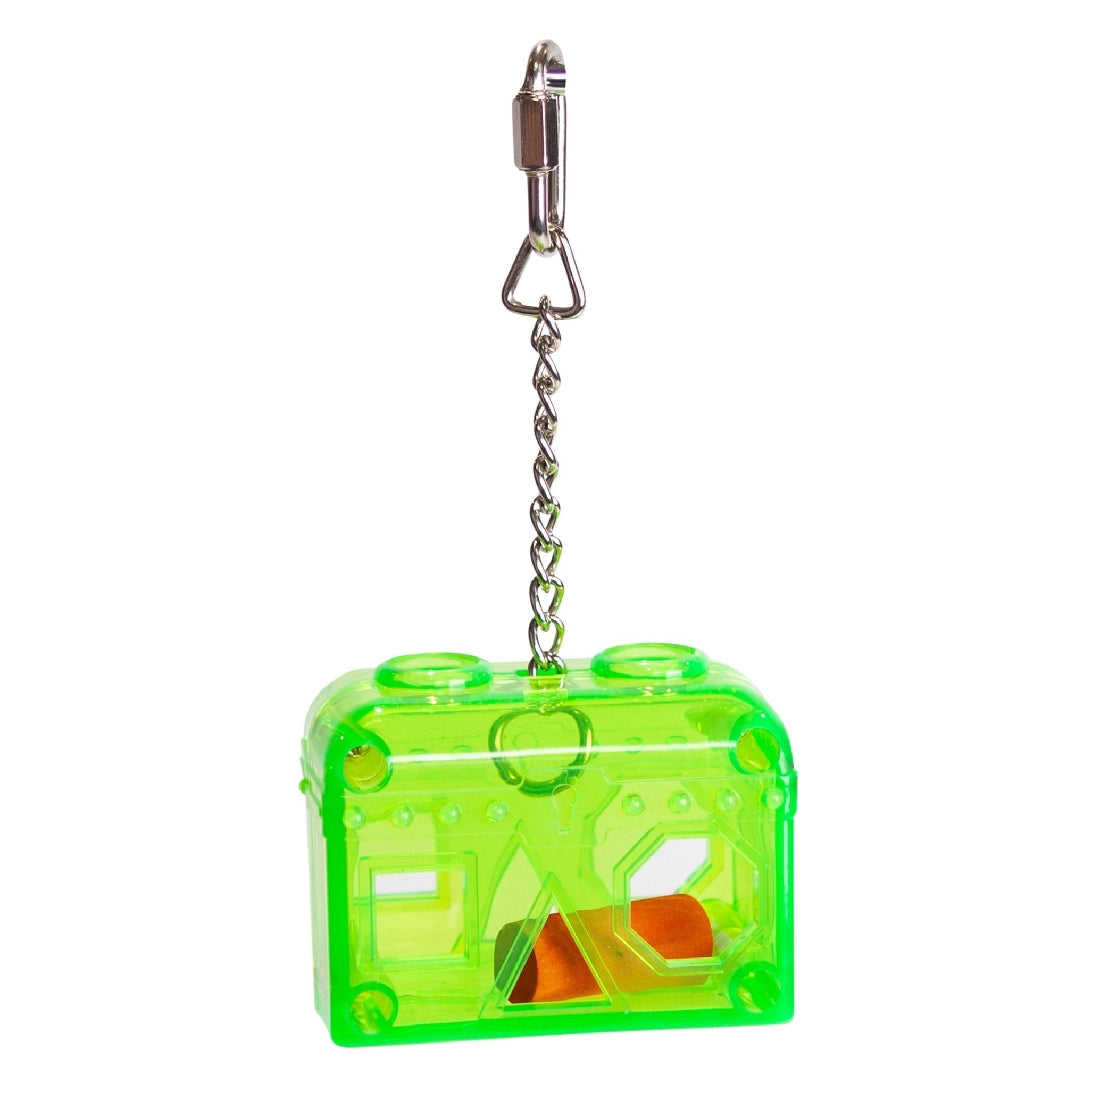 Green transparent bird toy with metal chain on white background.